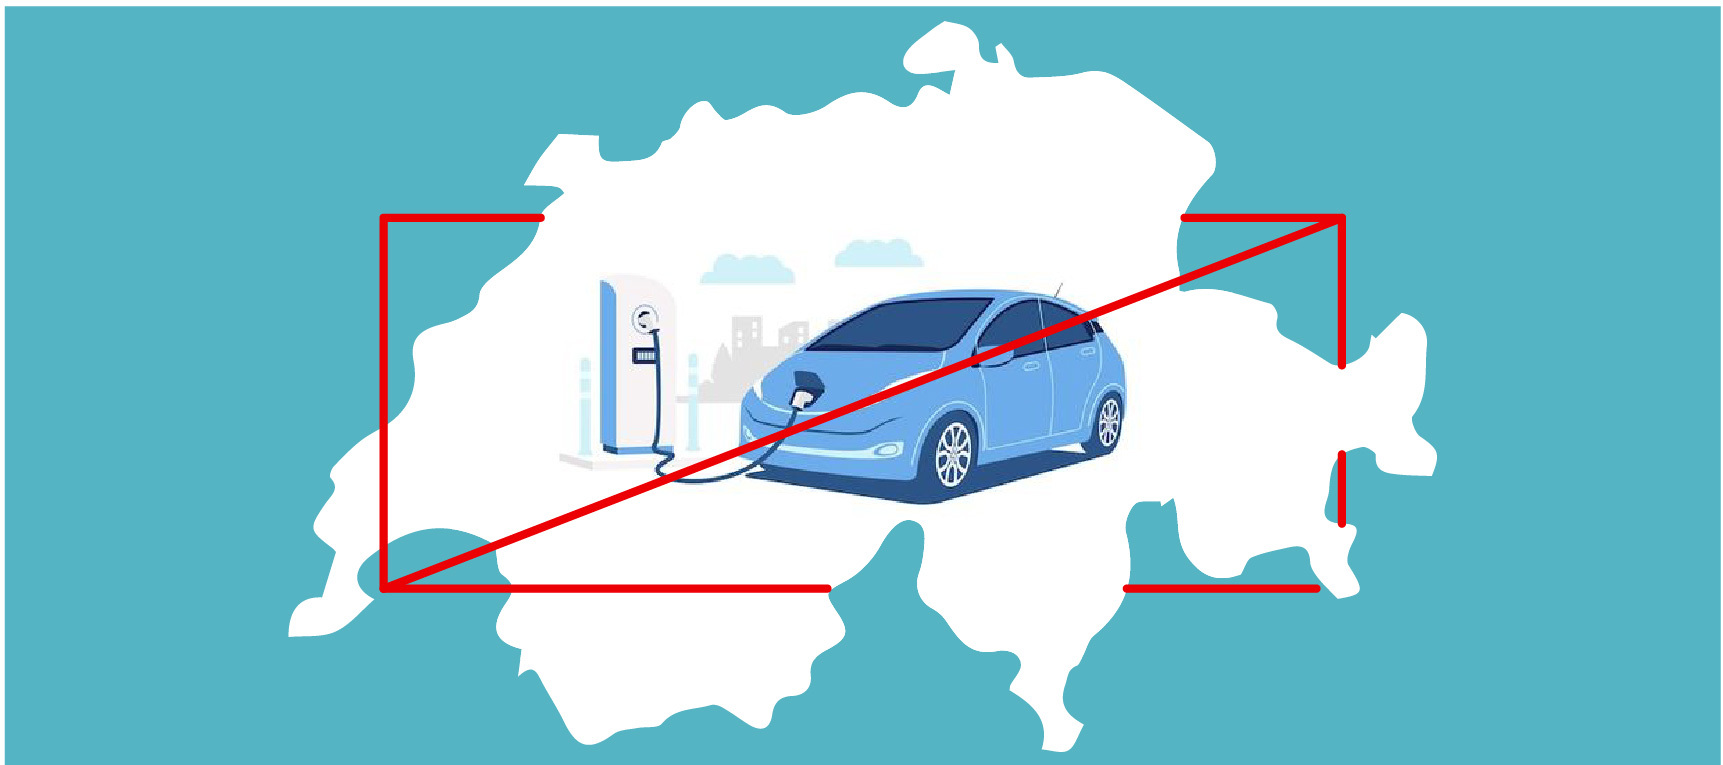 Switzerland to Be the First Country to Ban Electric Vehicles! GFI NEWS